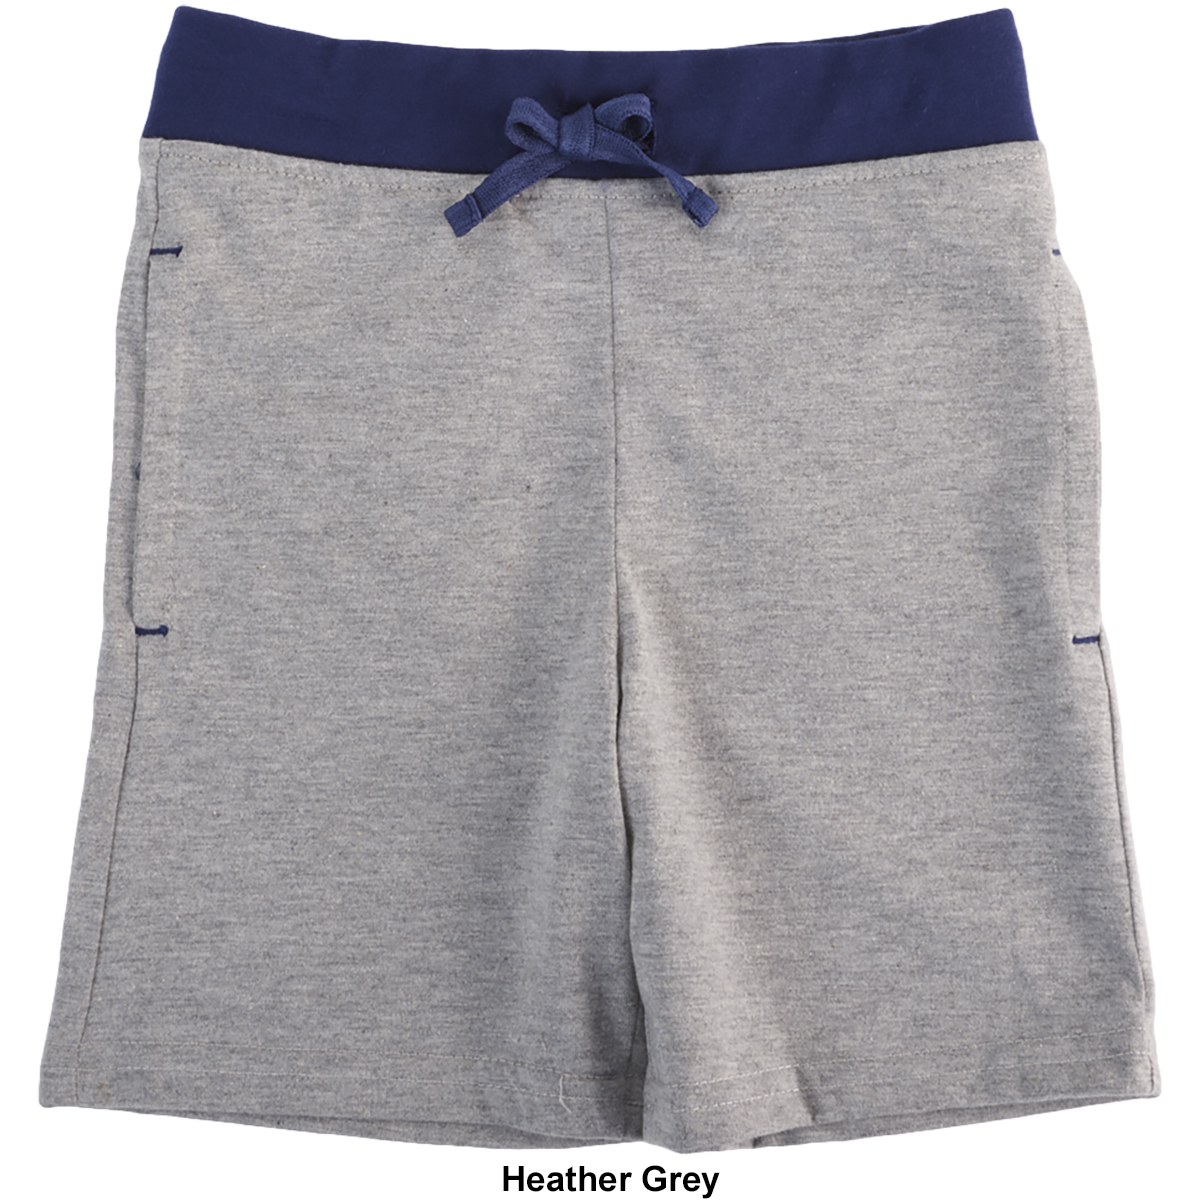 Toddler Boy Tales & Stories Jersey Shorts - image 4